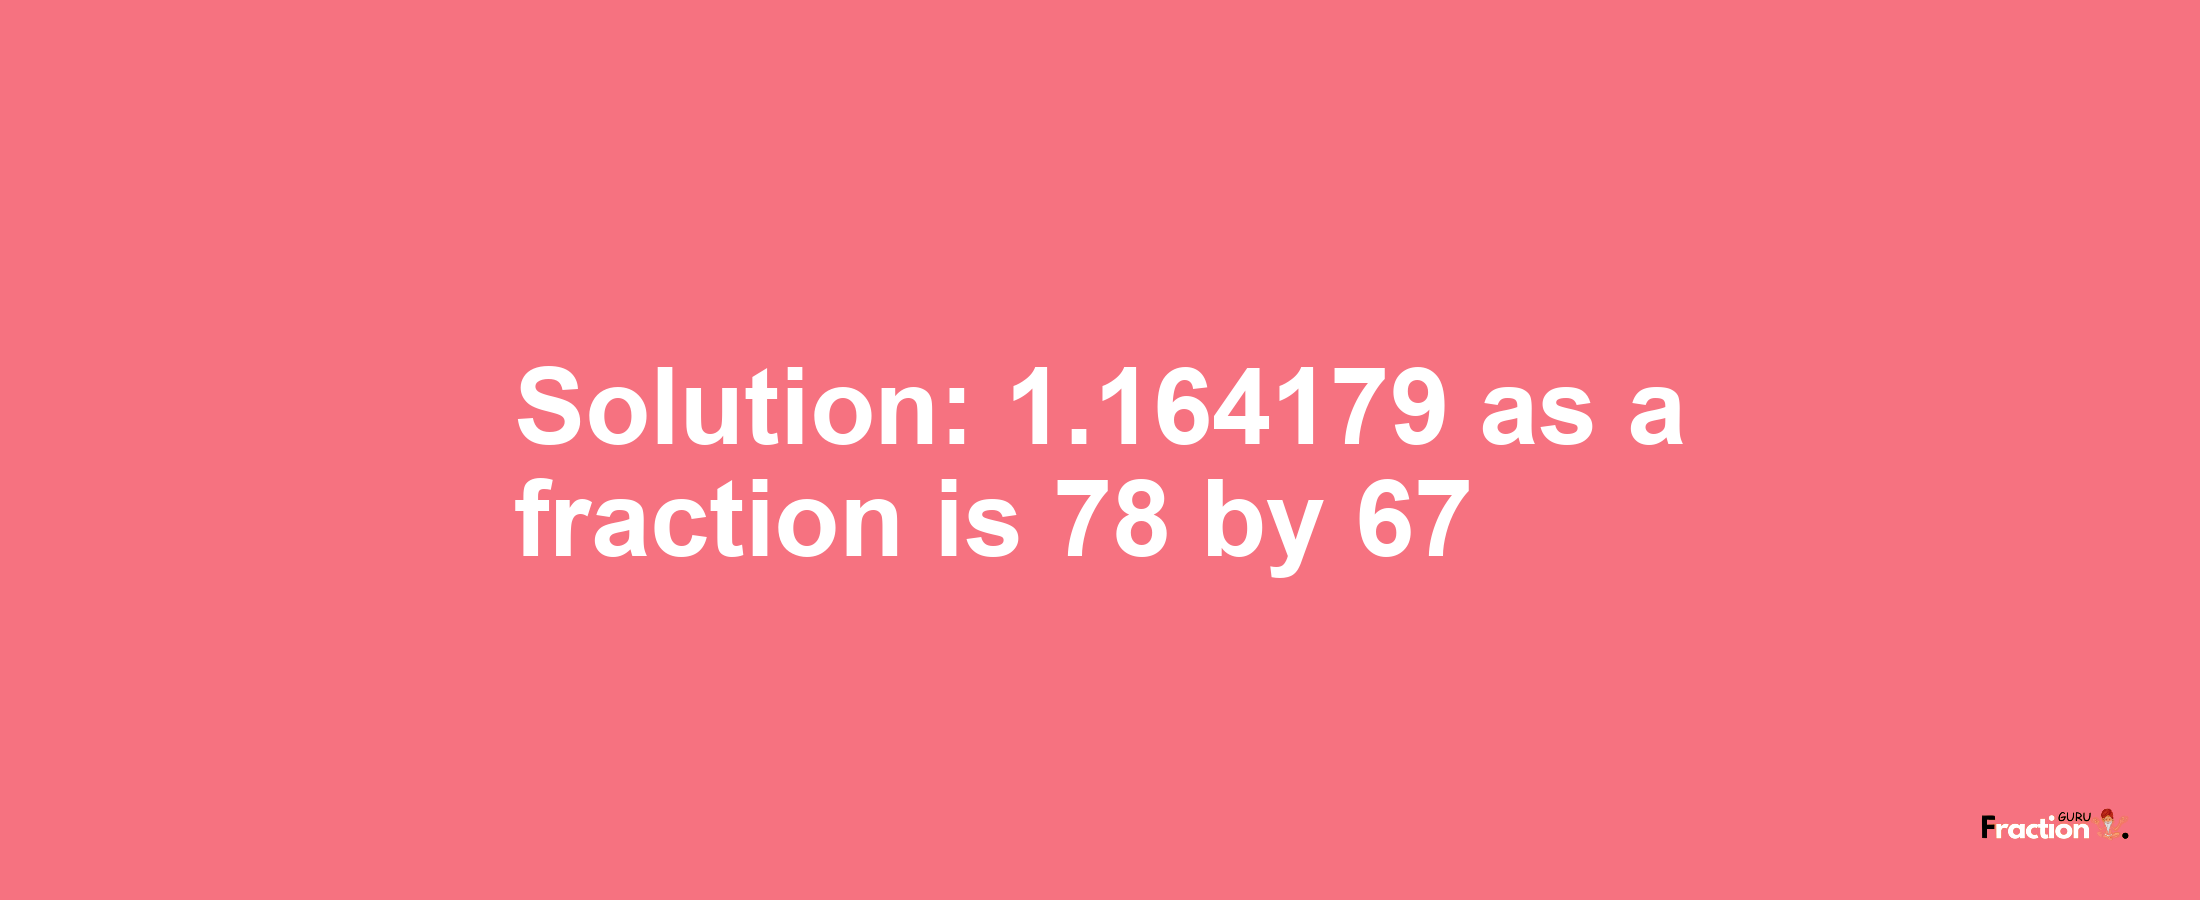 Solution:1.164179 as a fraction is 78/67